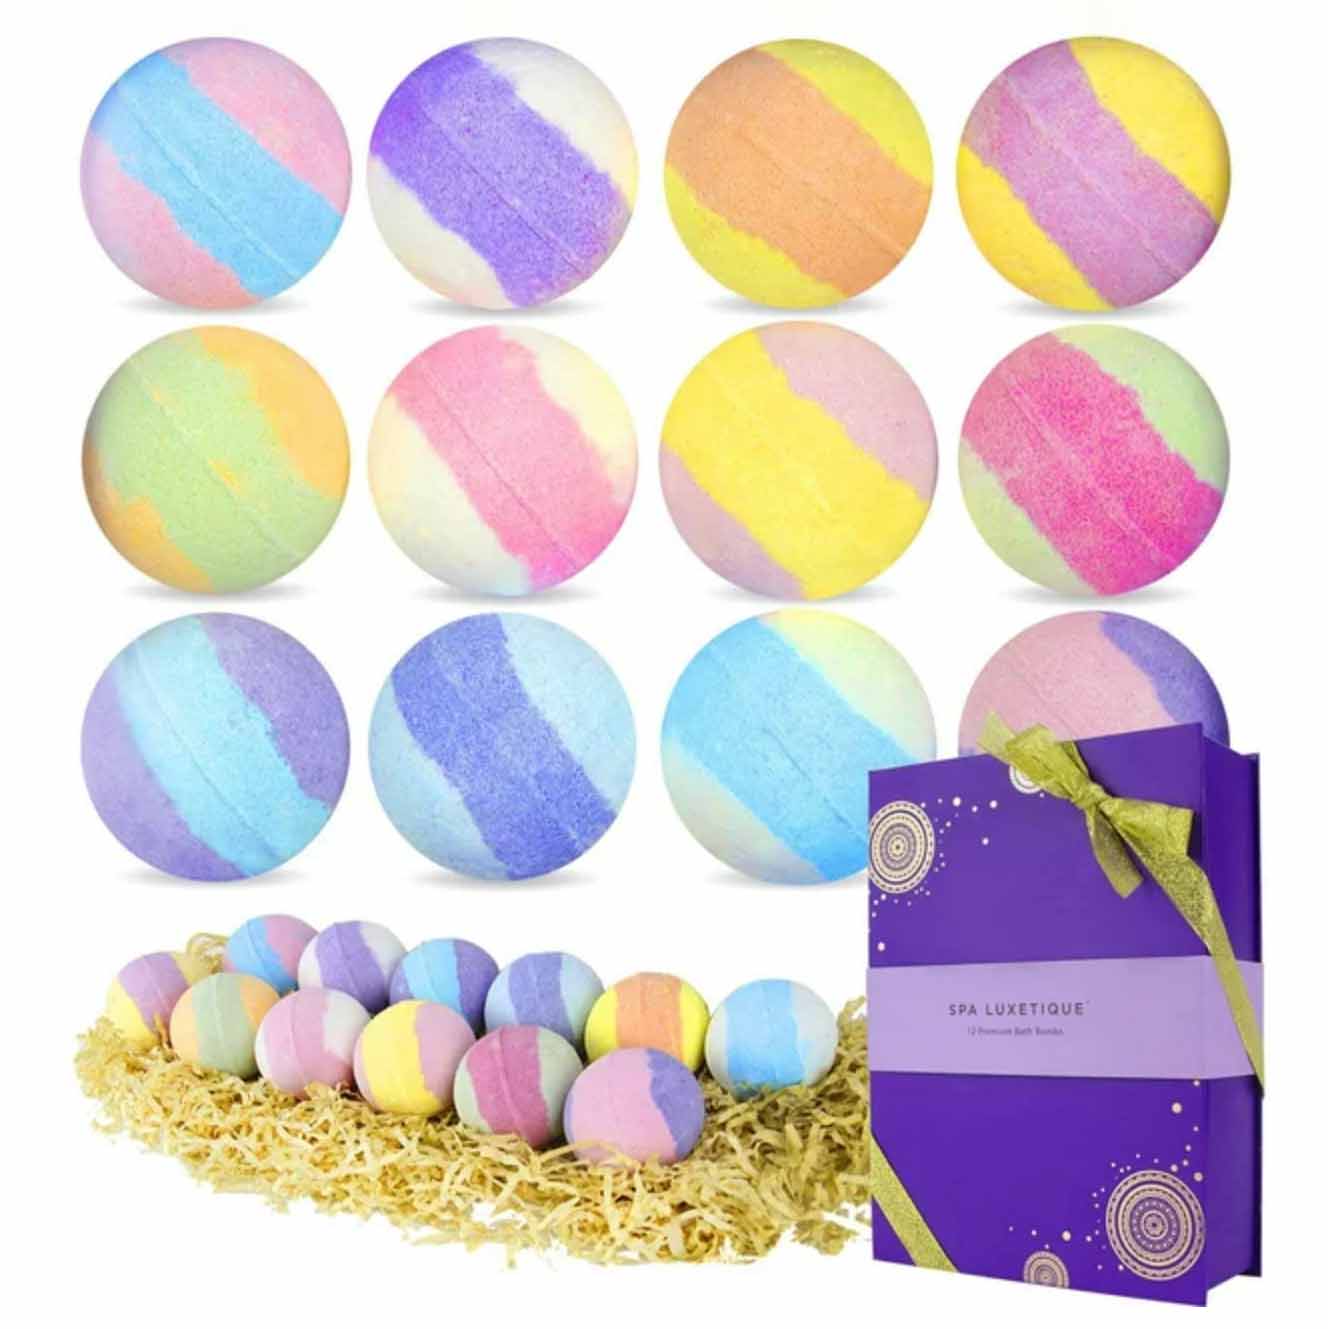 Colorful bath bombs and a purple box packaging